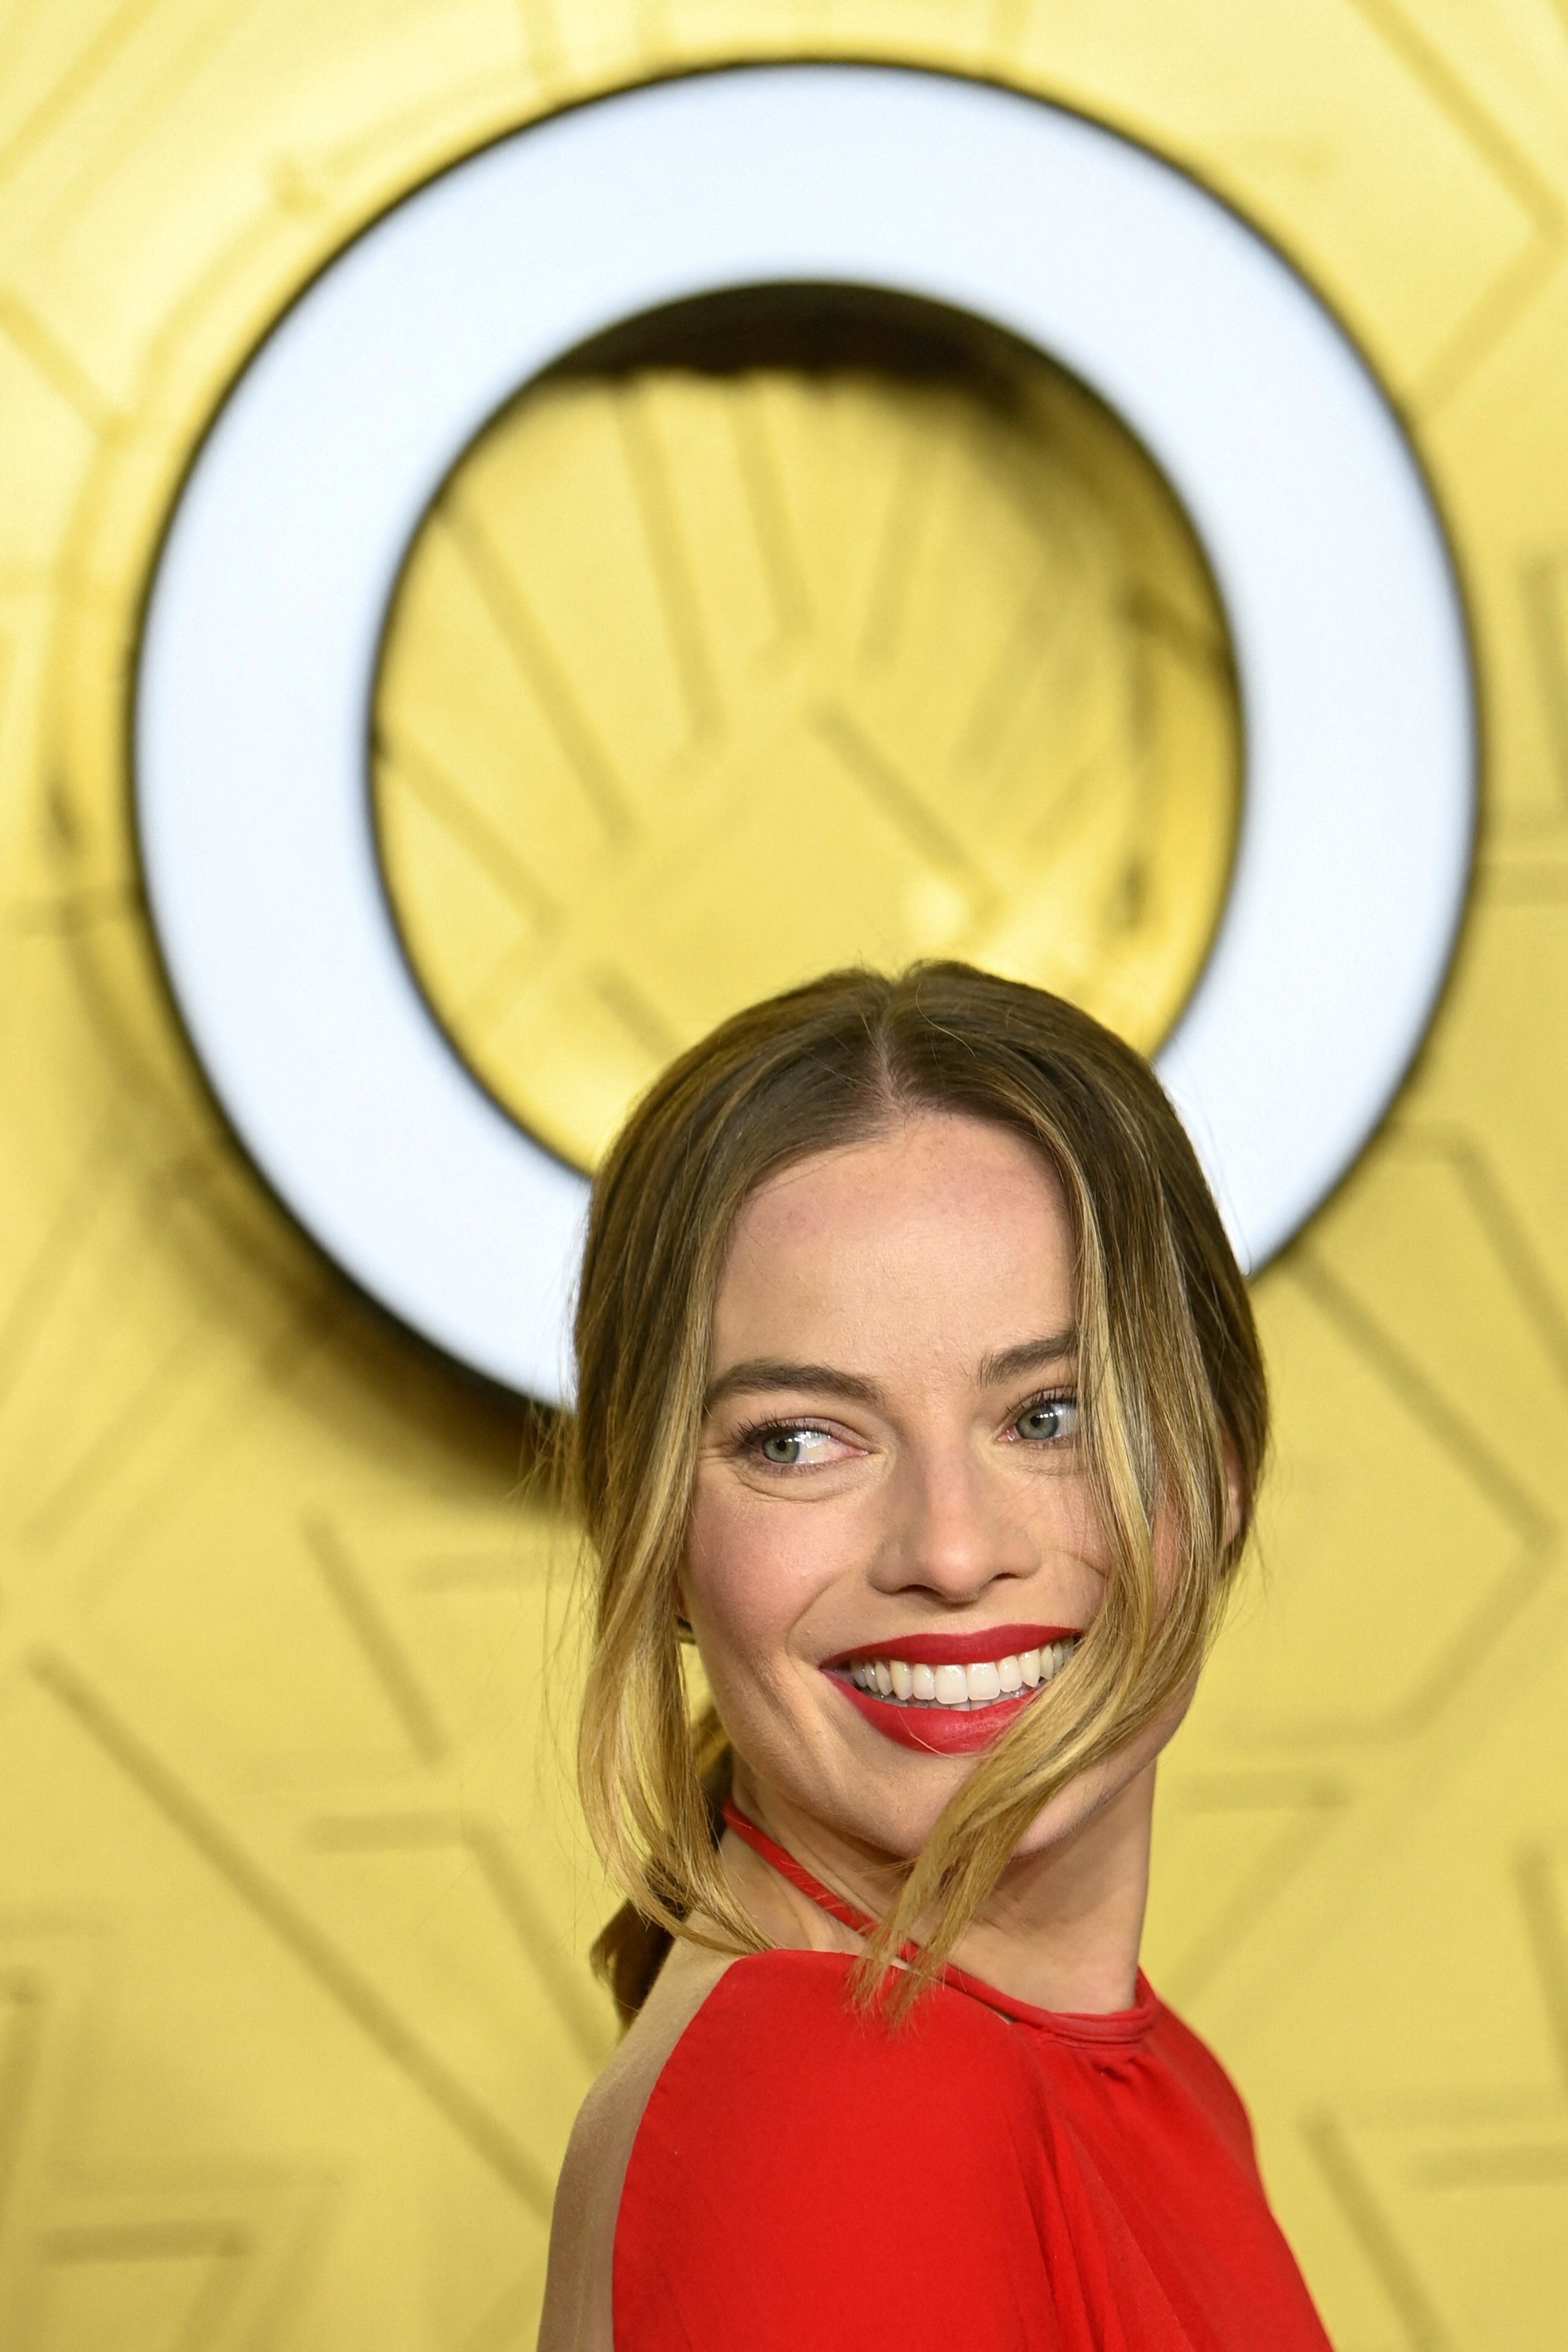 Actor Margot Robbie attends the premiere of the movie 'Babylon' in London, Britain, January 12, 2023. REUTERS/Toby Melville